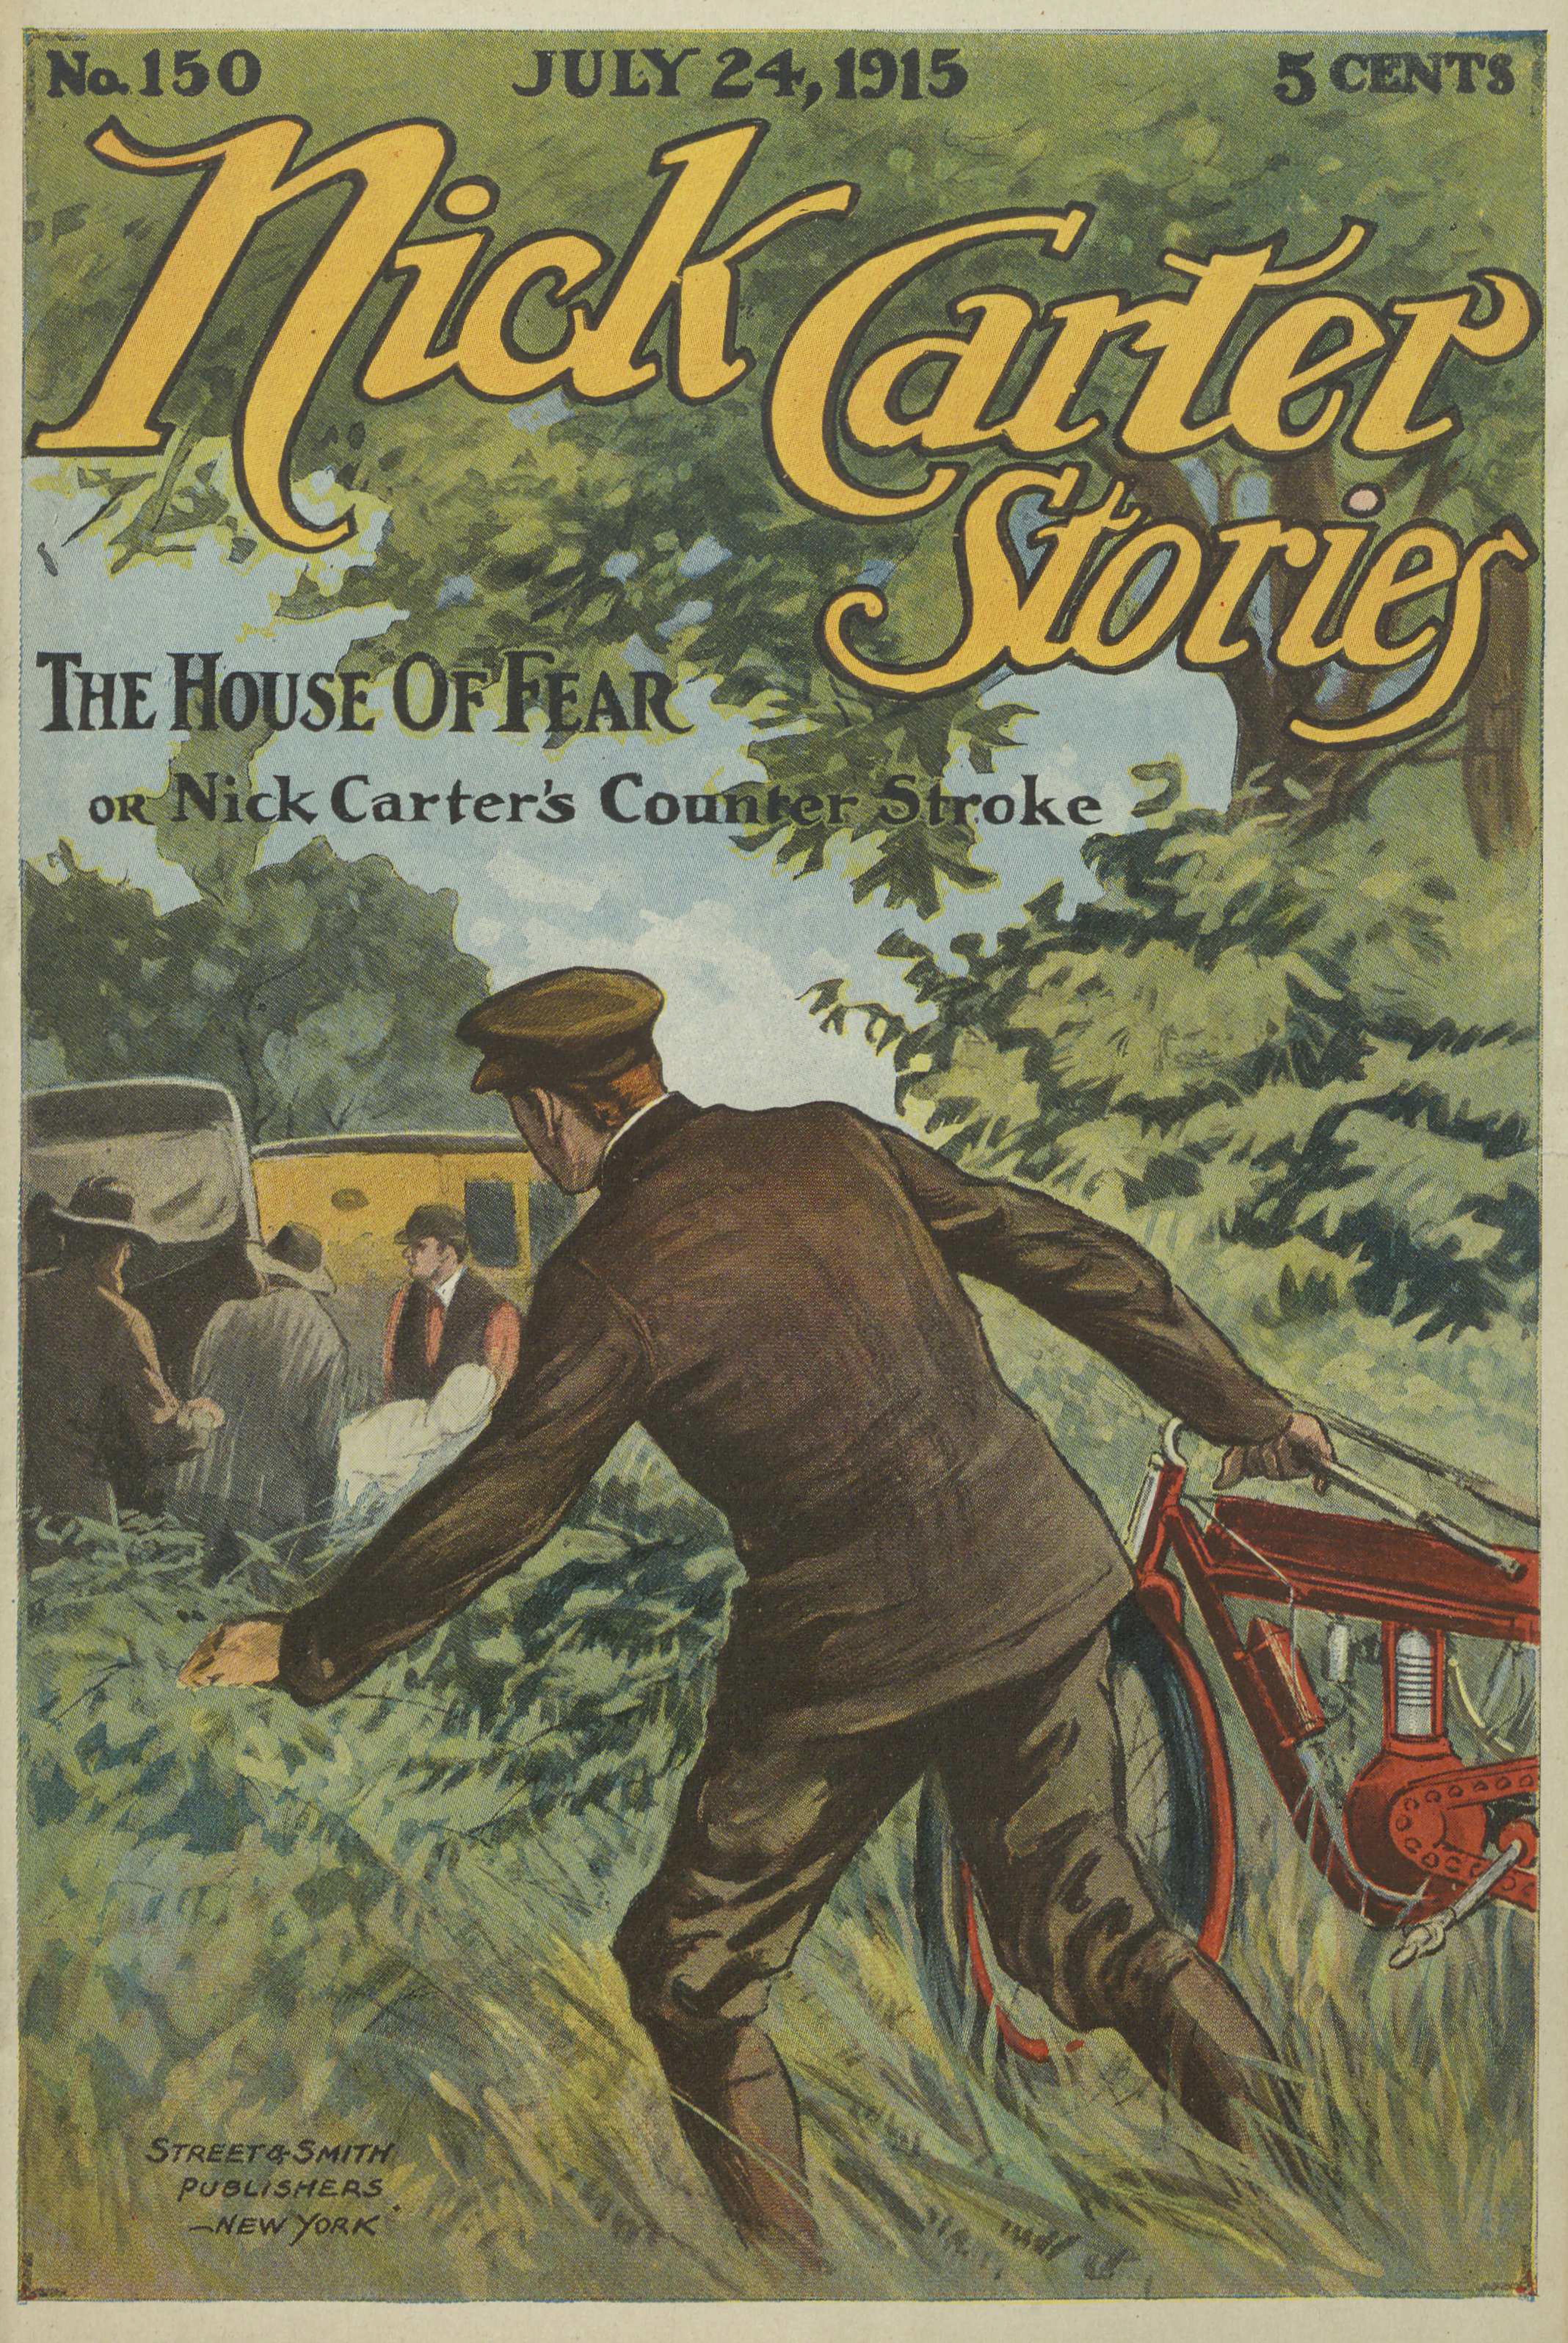 Nick Carter Stories No. 150, July 24, 1915: The House of Fear; or, Nick Carter's Counterstroke.